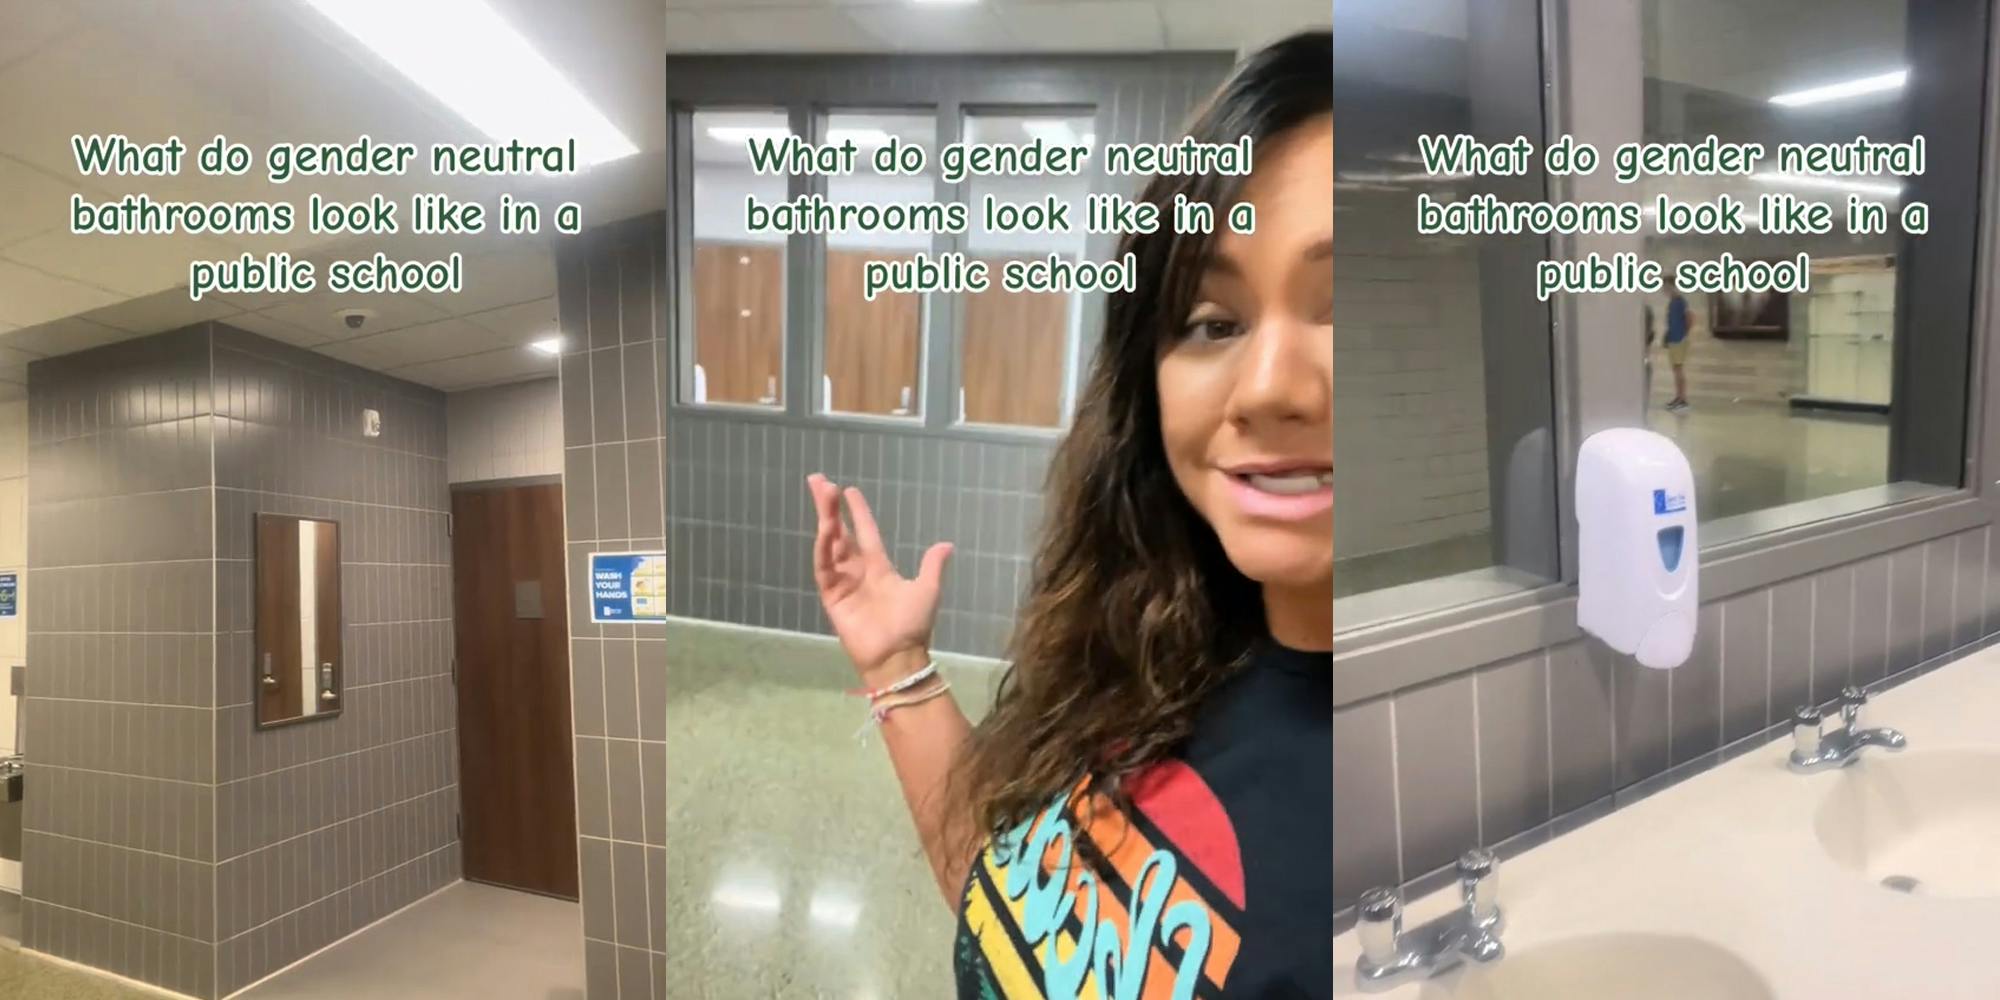 gender neutral bathroom with caption "What do gender neutral bathrooms look like in a public school" (l) woman speaking next to gender neutral bathroom with caption "What do gender neutral bathrooms look like in a public school" (c) interior of gender neutral bathroom with caption "What do gender neutral bathrooms look like in a public school" (r)